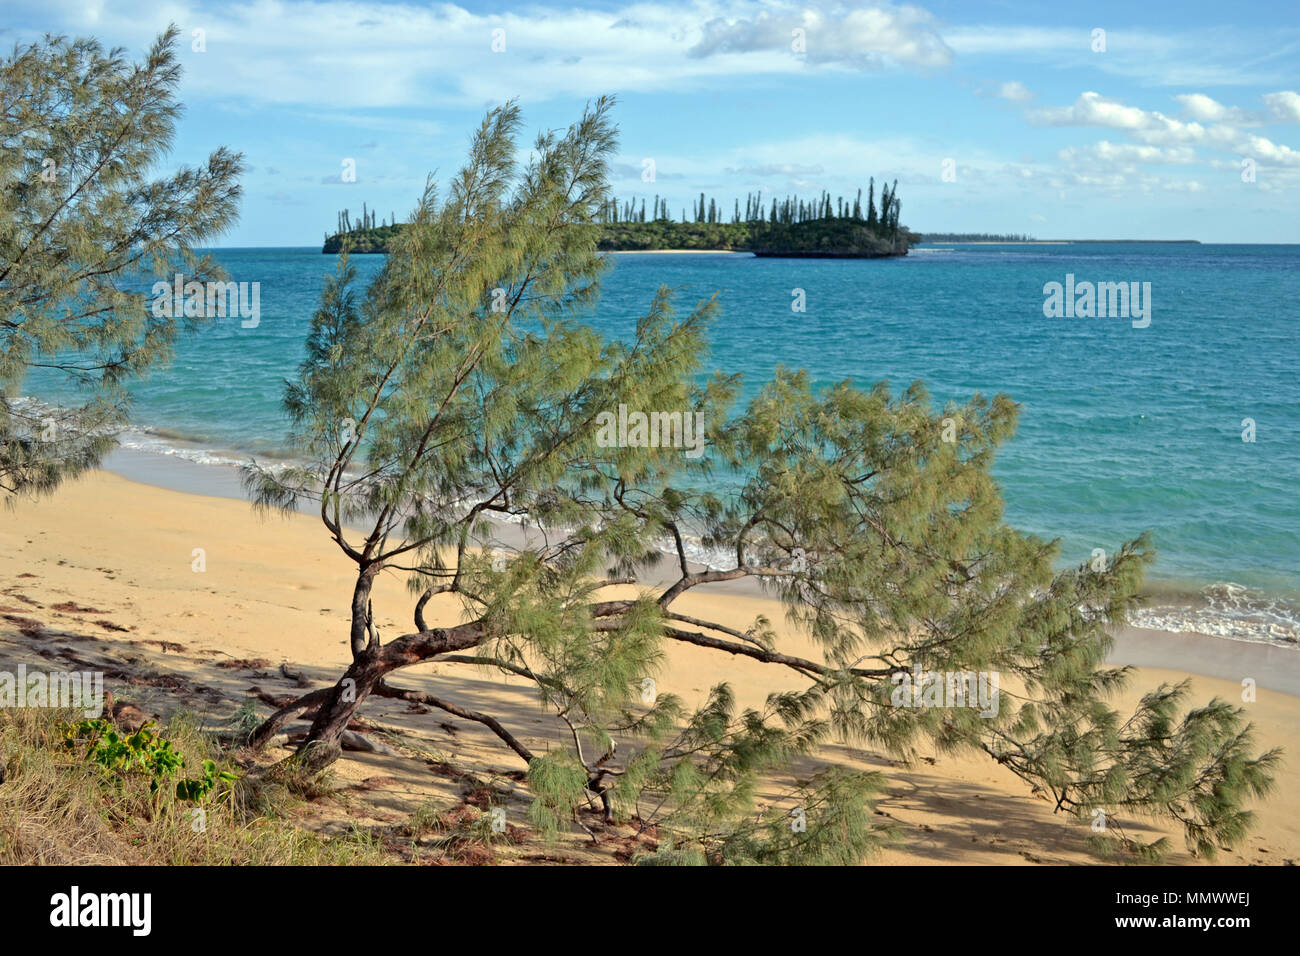 View of islands Duroc and Adventure from the Koueney beach, Isle of Pines, New Caledonia, South Pacific Stock Photo